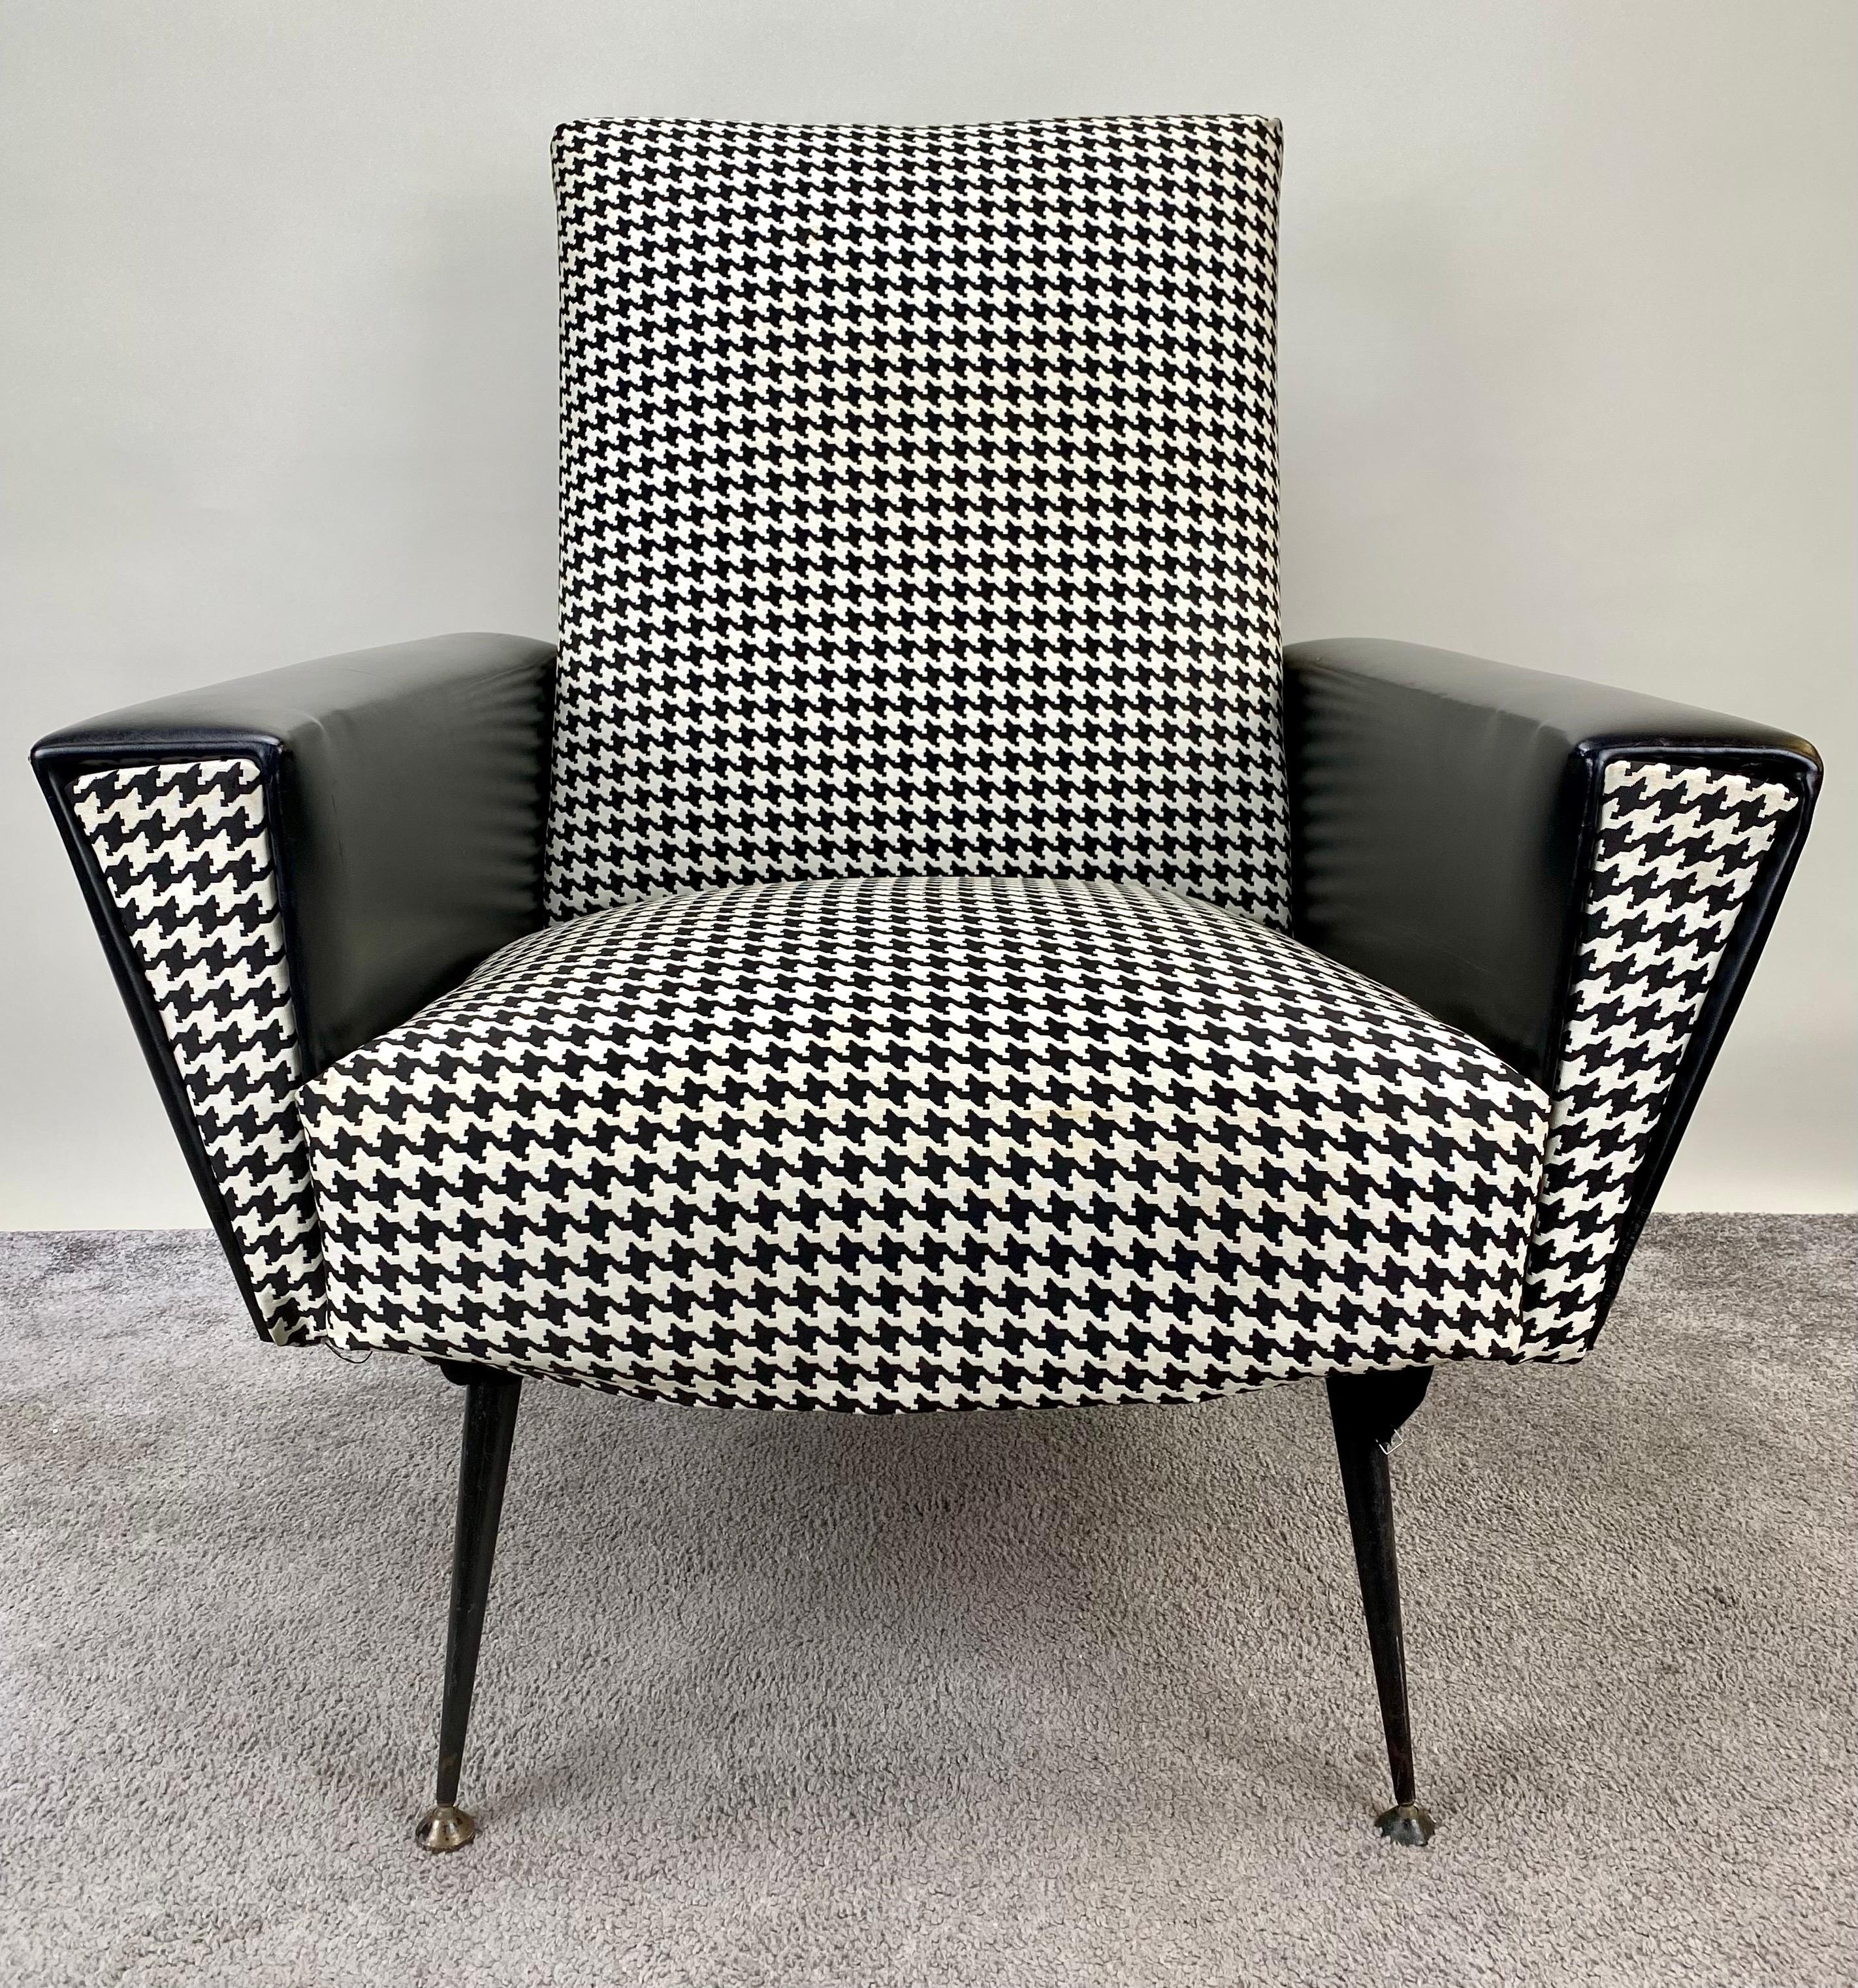 This black and white 1960's mid-century modern newly upholstered armchair is where you go to unwind, unplug, and relax. The arms are covered in black leather and it features strong back, deep seat, and curved arms and elegant.

Dimensions: 34